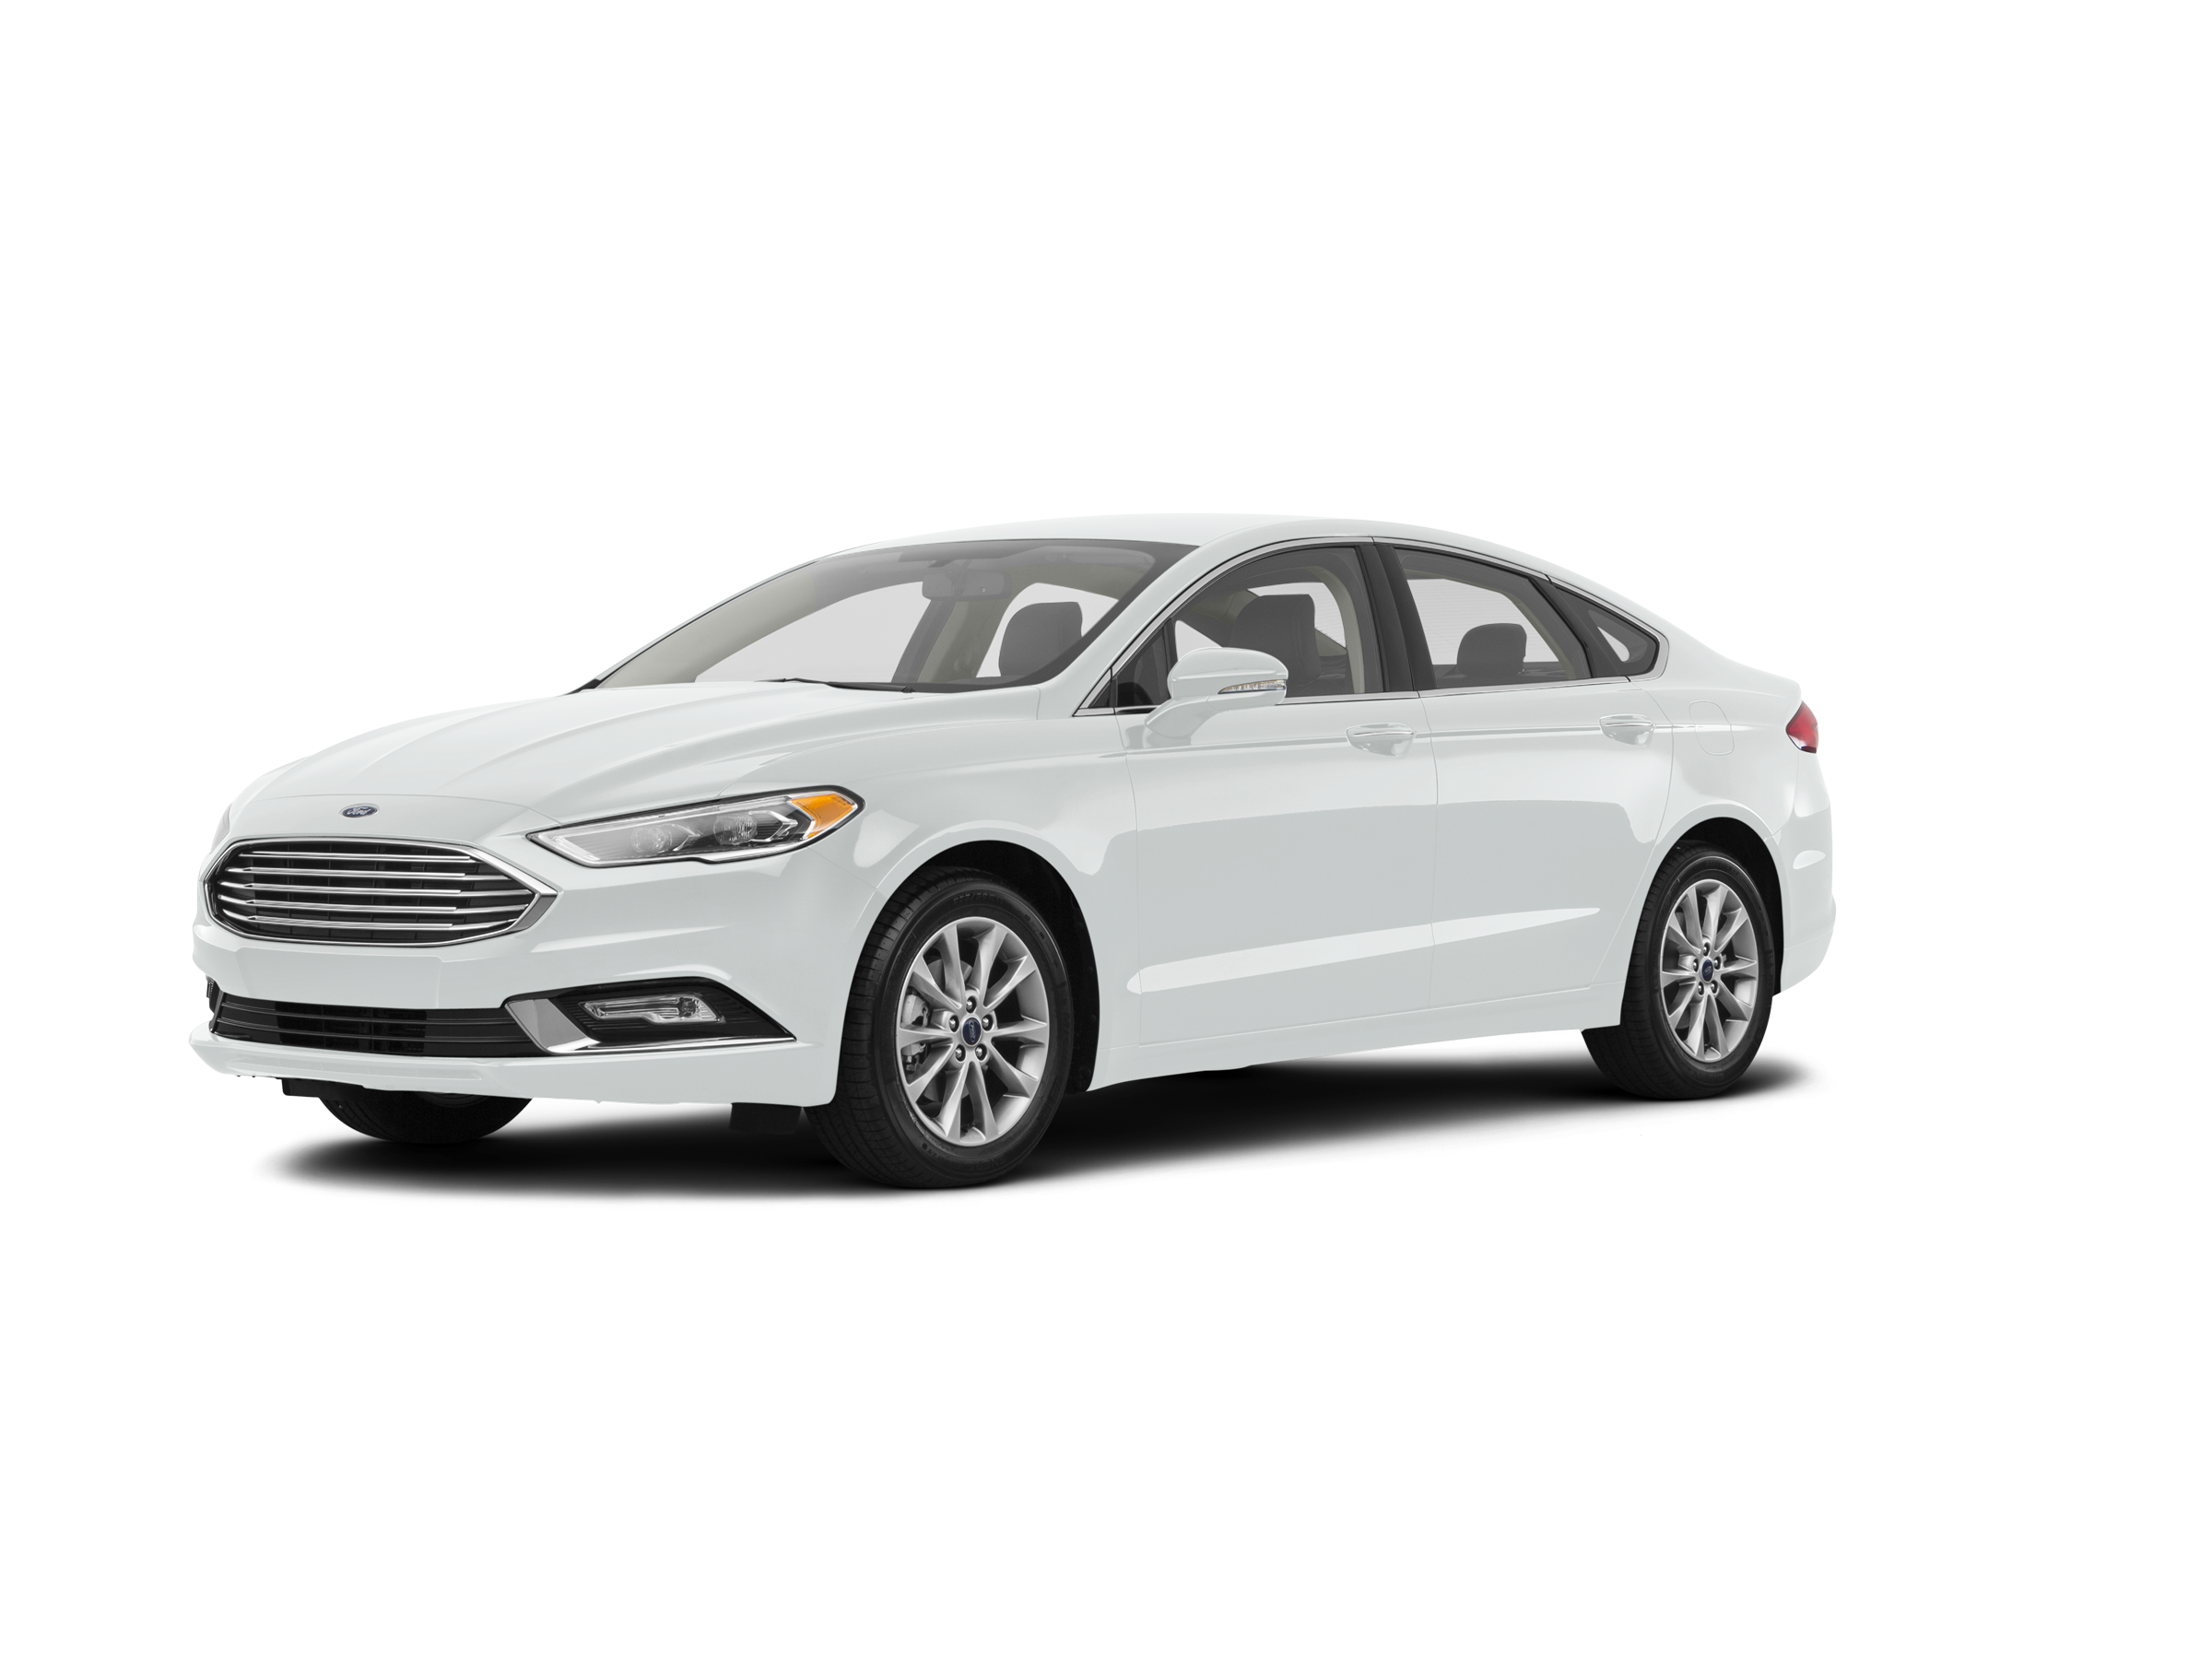 2017 Ford Fusion 1.5 EcoBoost First Test: Turbocharged and Well